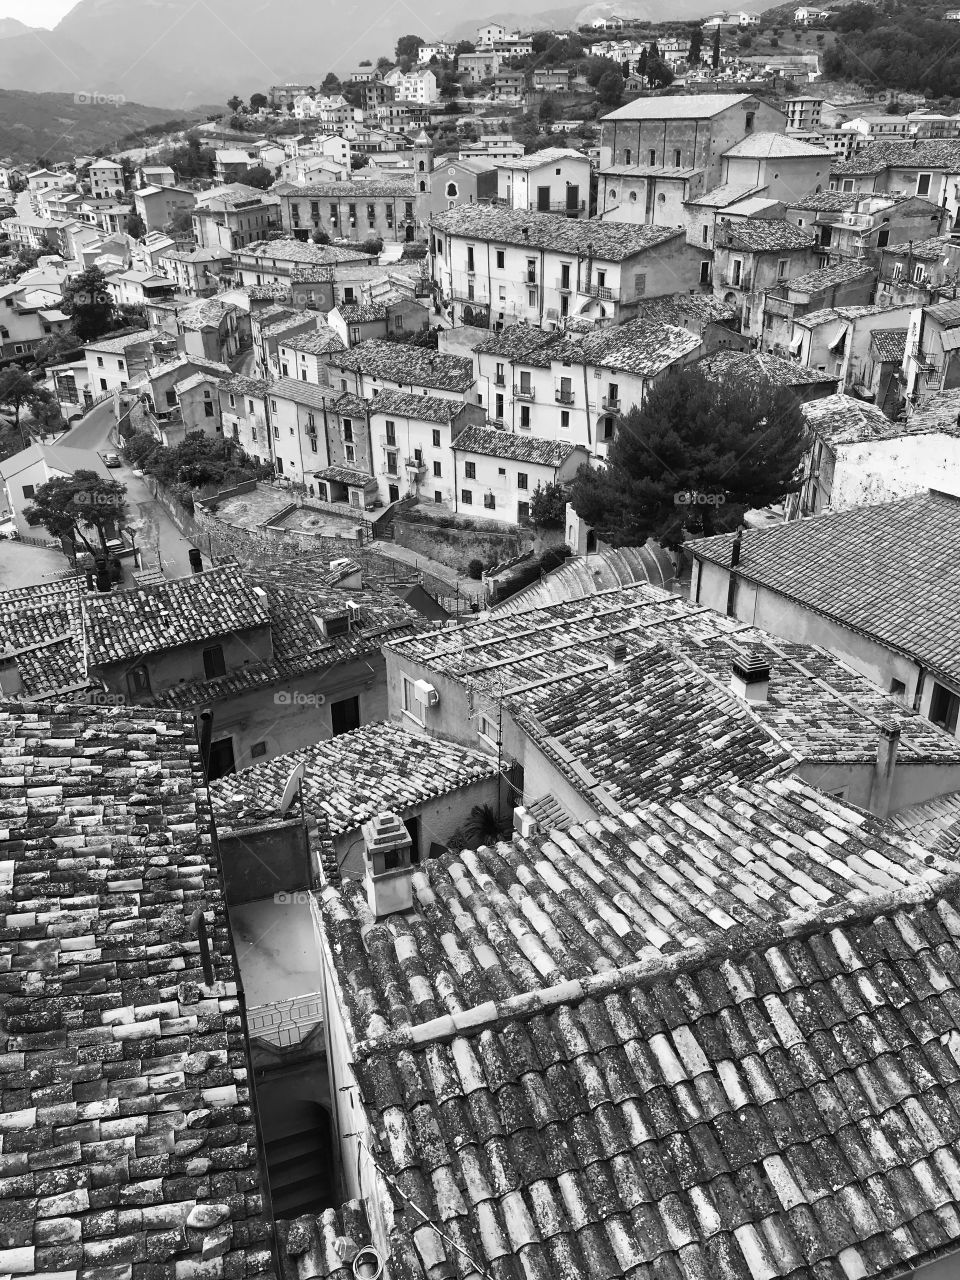 Roofs of Altomonte, an old small town in South Italy 